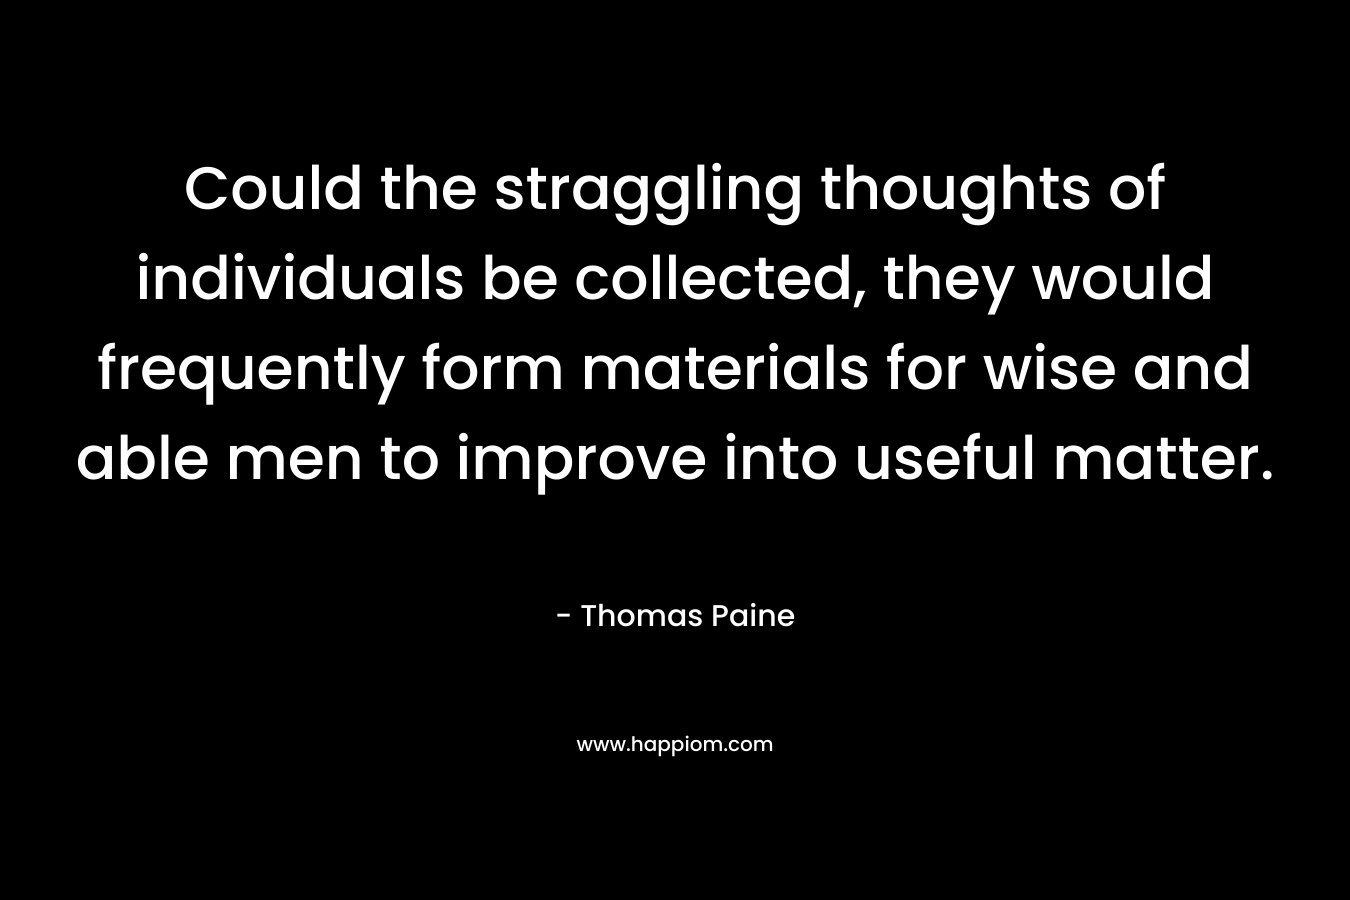 Could the straggling thoughts of individuals be collected, they would frequently form materials for wise and able men to improve into useful matter. – Thomas Paine